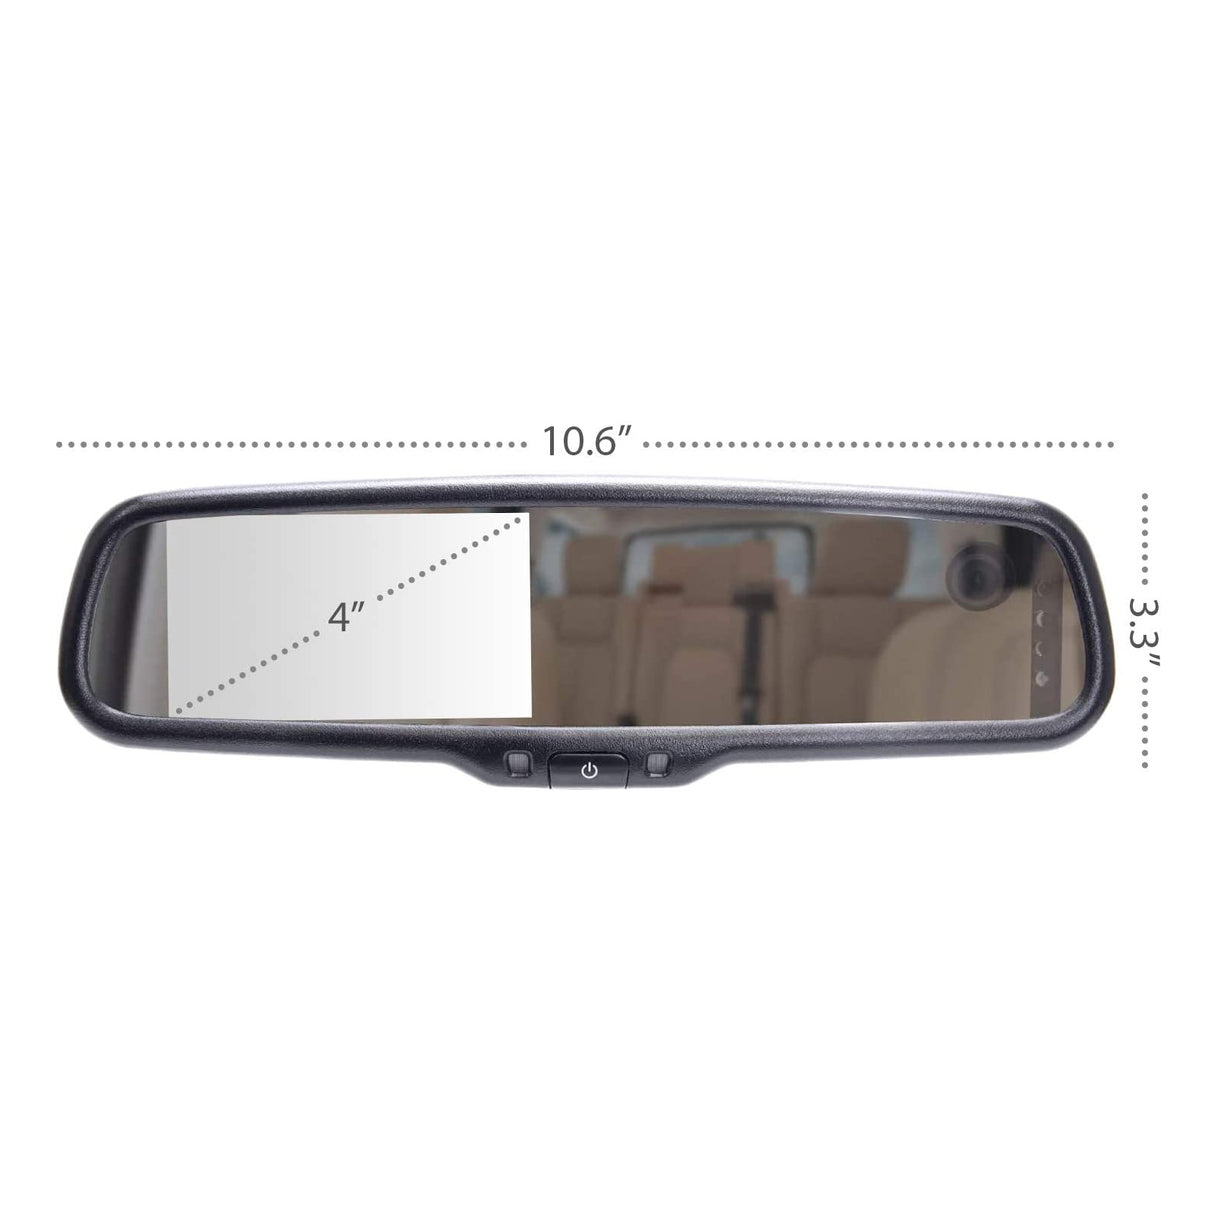 Master Tailgaters 10.6" OEM Rear View Mirror Dash Cam with 4" LCD Screen + Infrared LED In-Cabin Camera for Rideshare | Rearview Universal Fit | 1080p HD DVR | Anti Glare | AHD Backup Camera Included